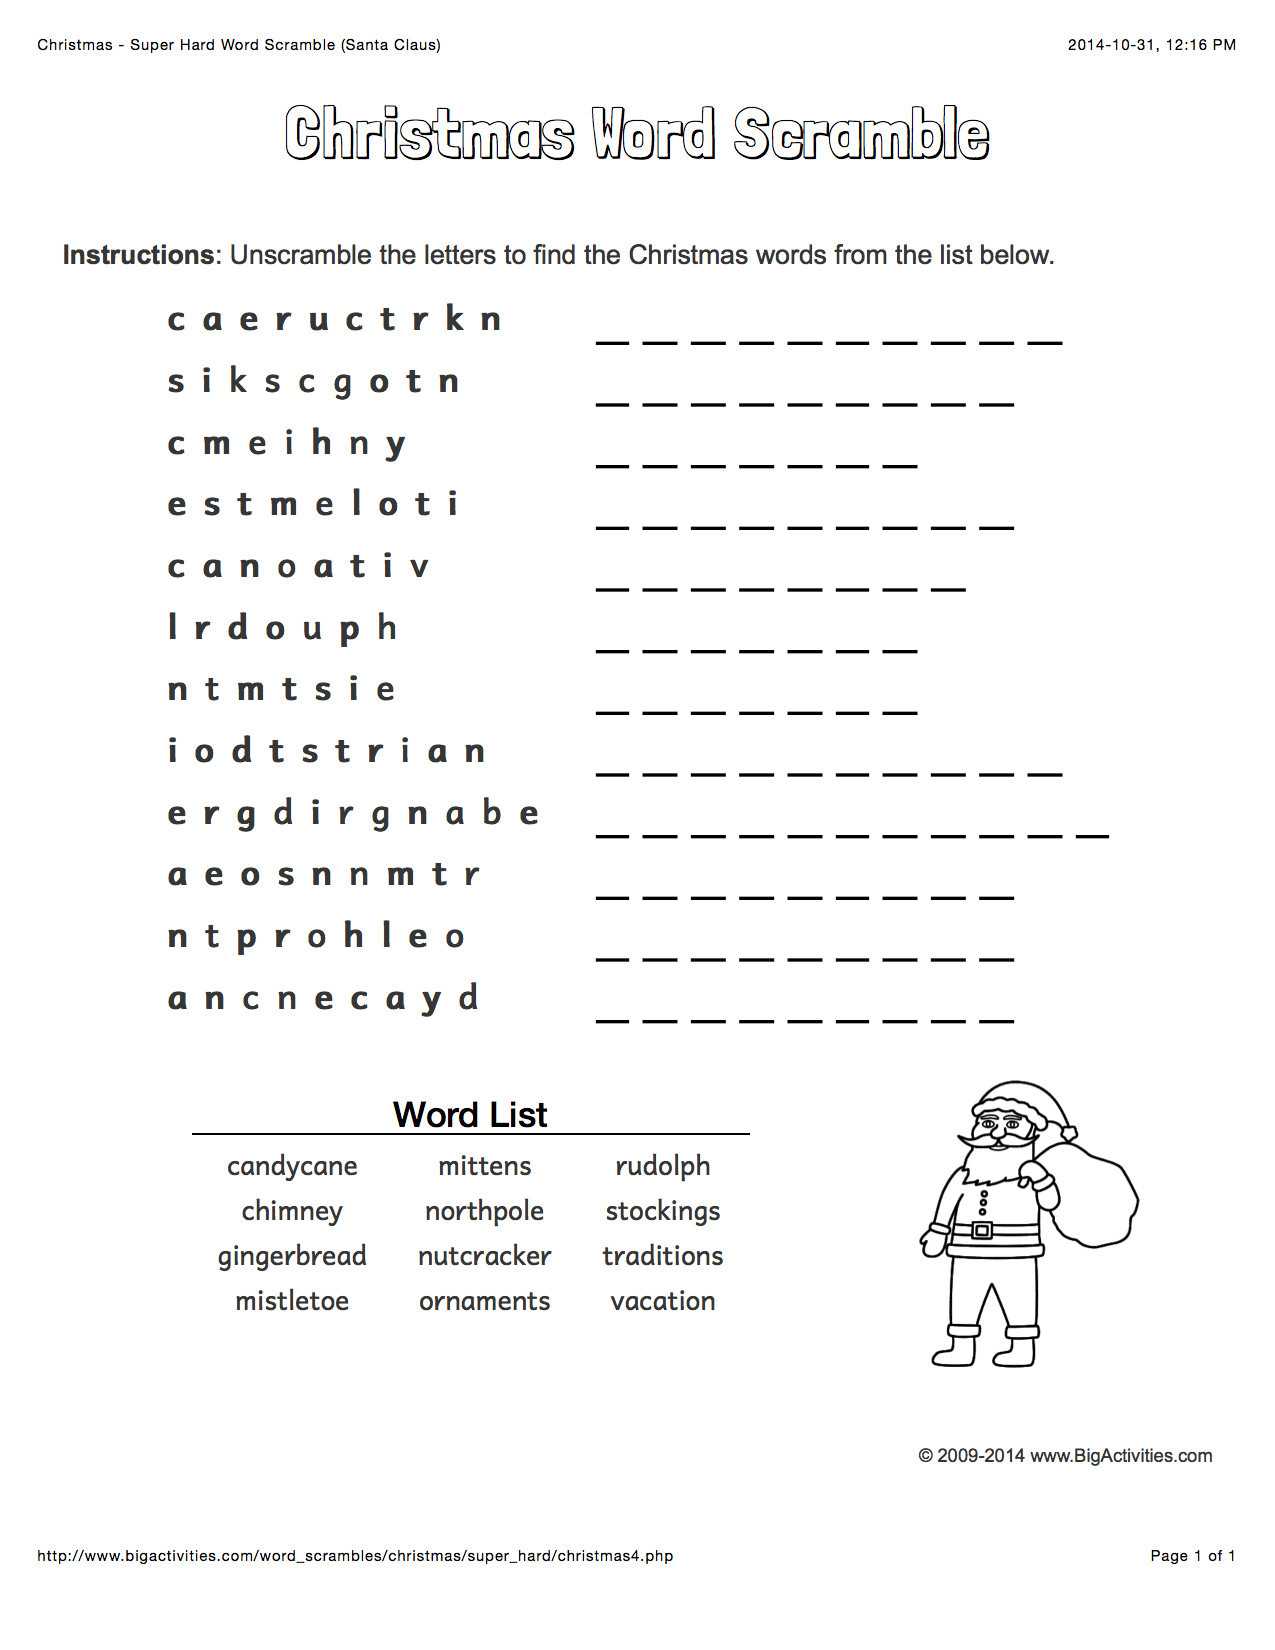 a-worksheet-for-beginning-with-the-letter-i-and-an-image-of-a-cat